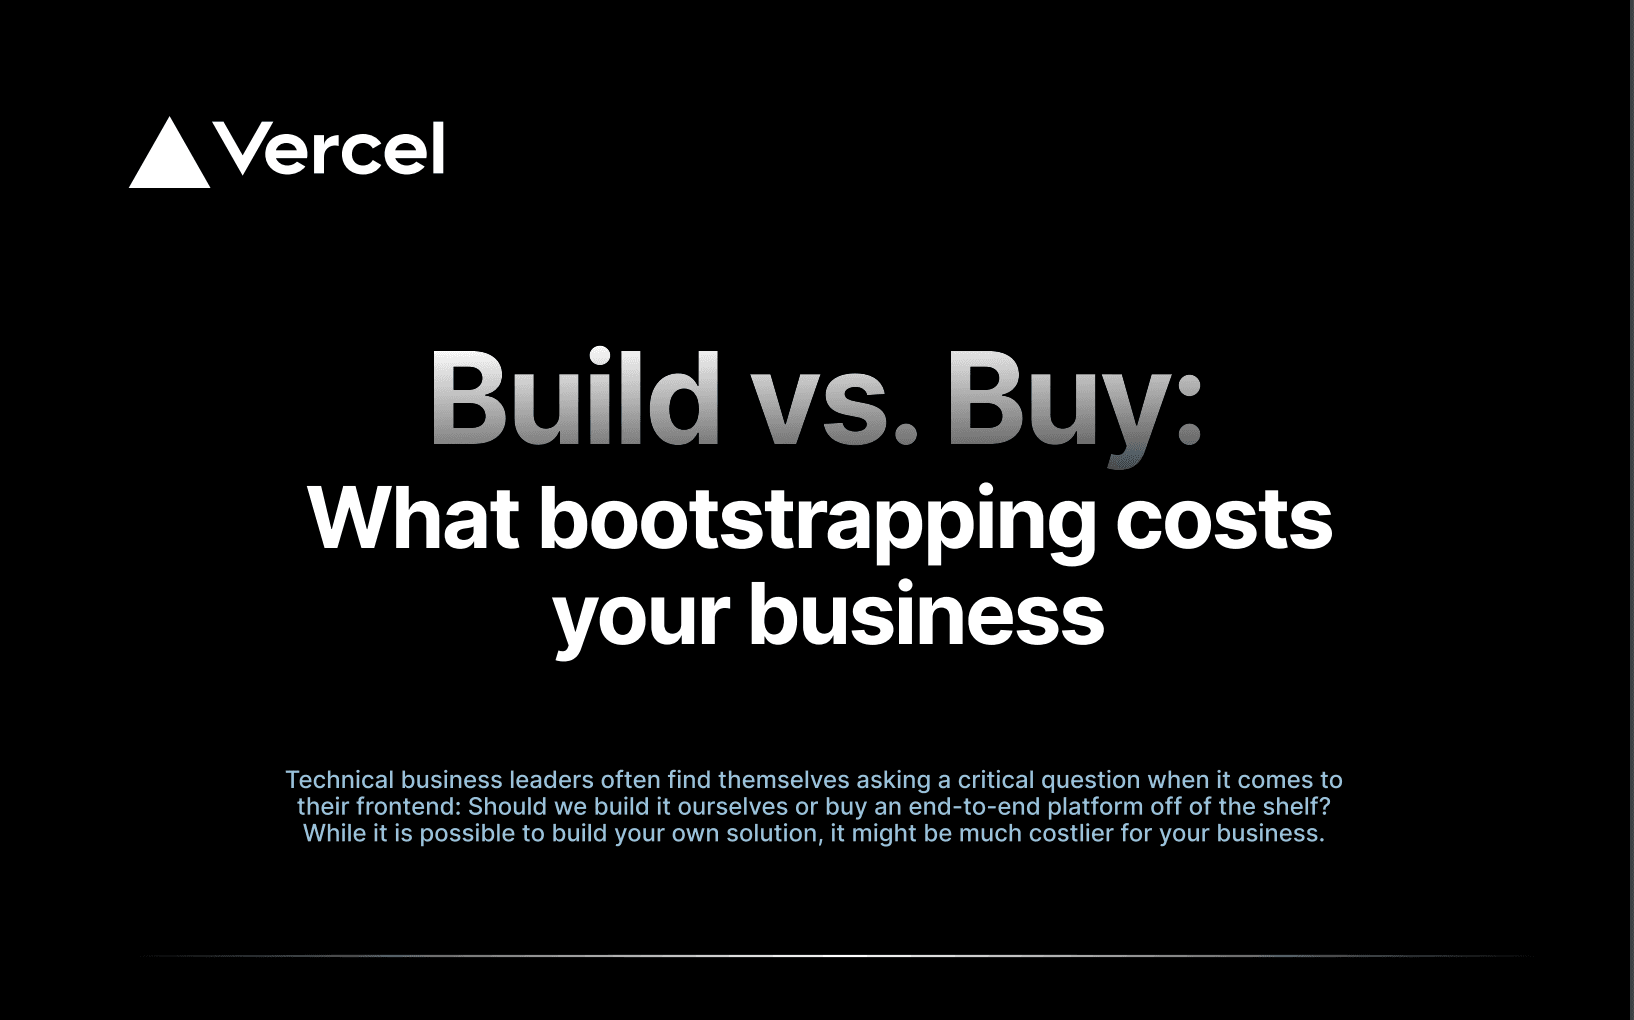 Build vs. Buy: What bootstrapping costs your business